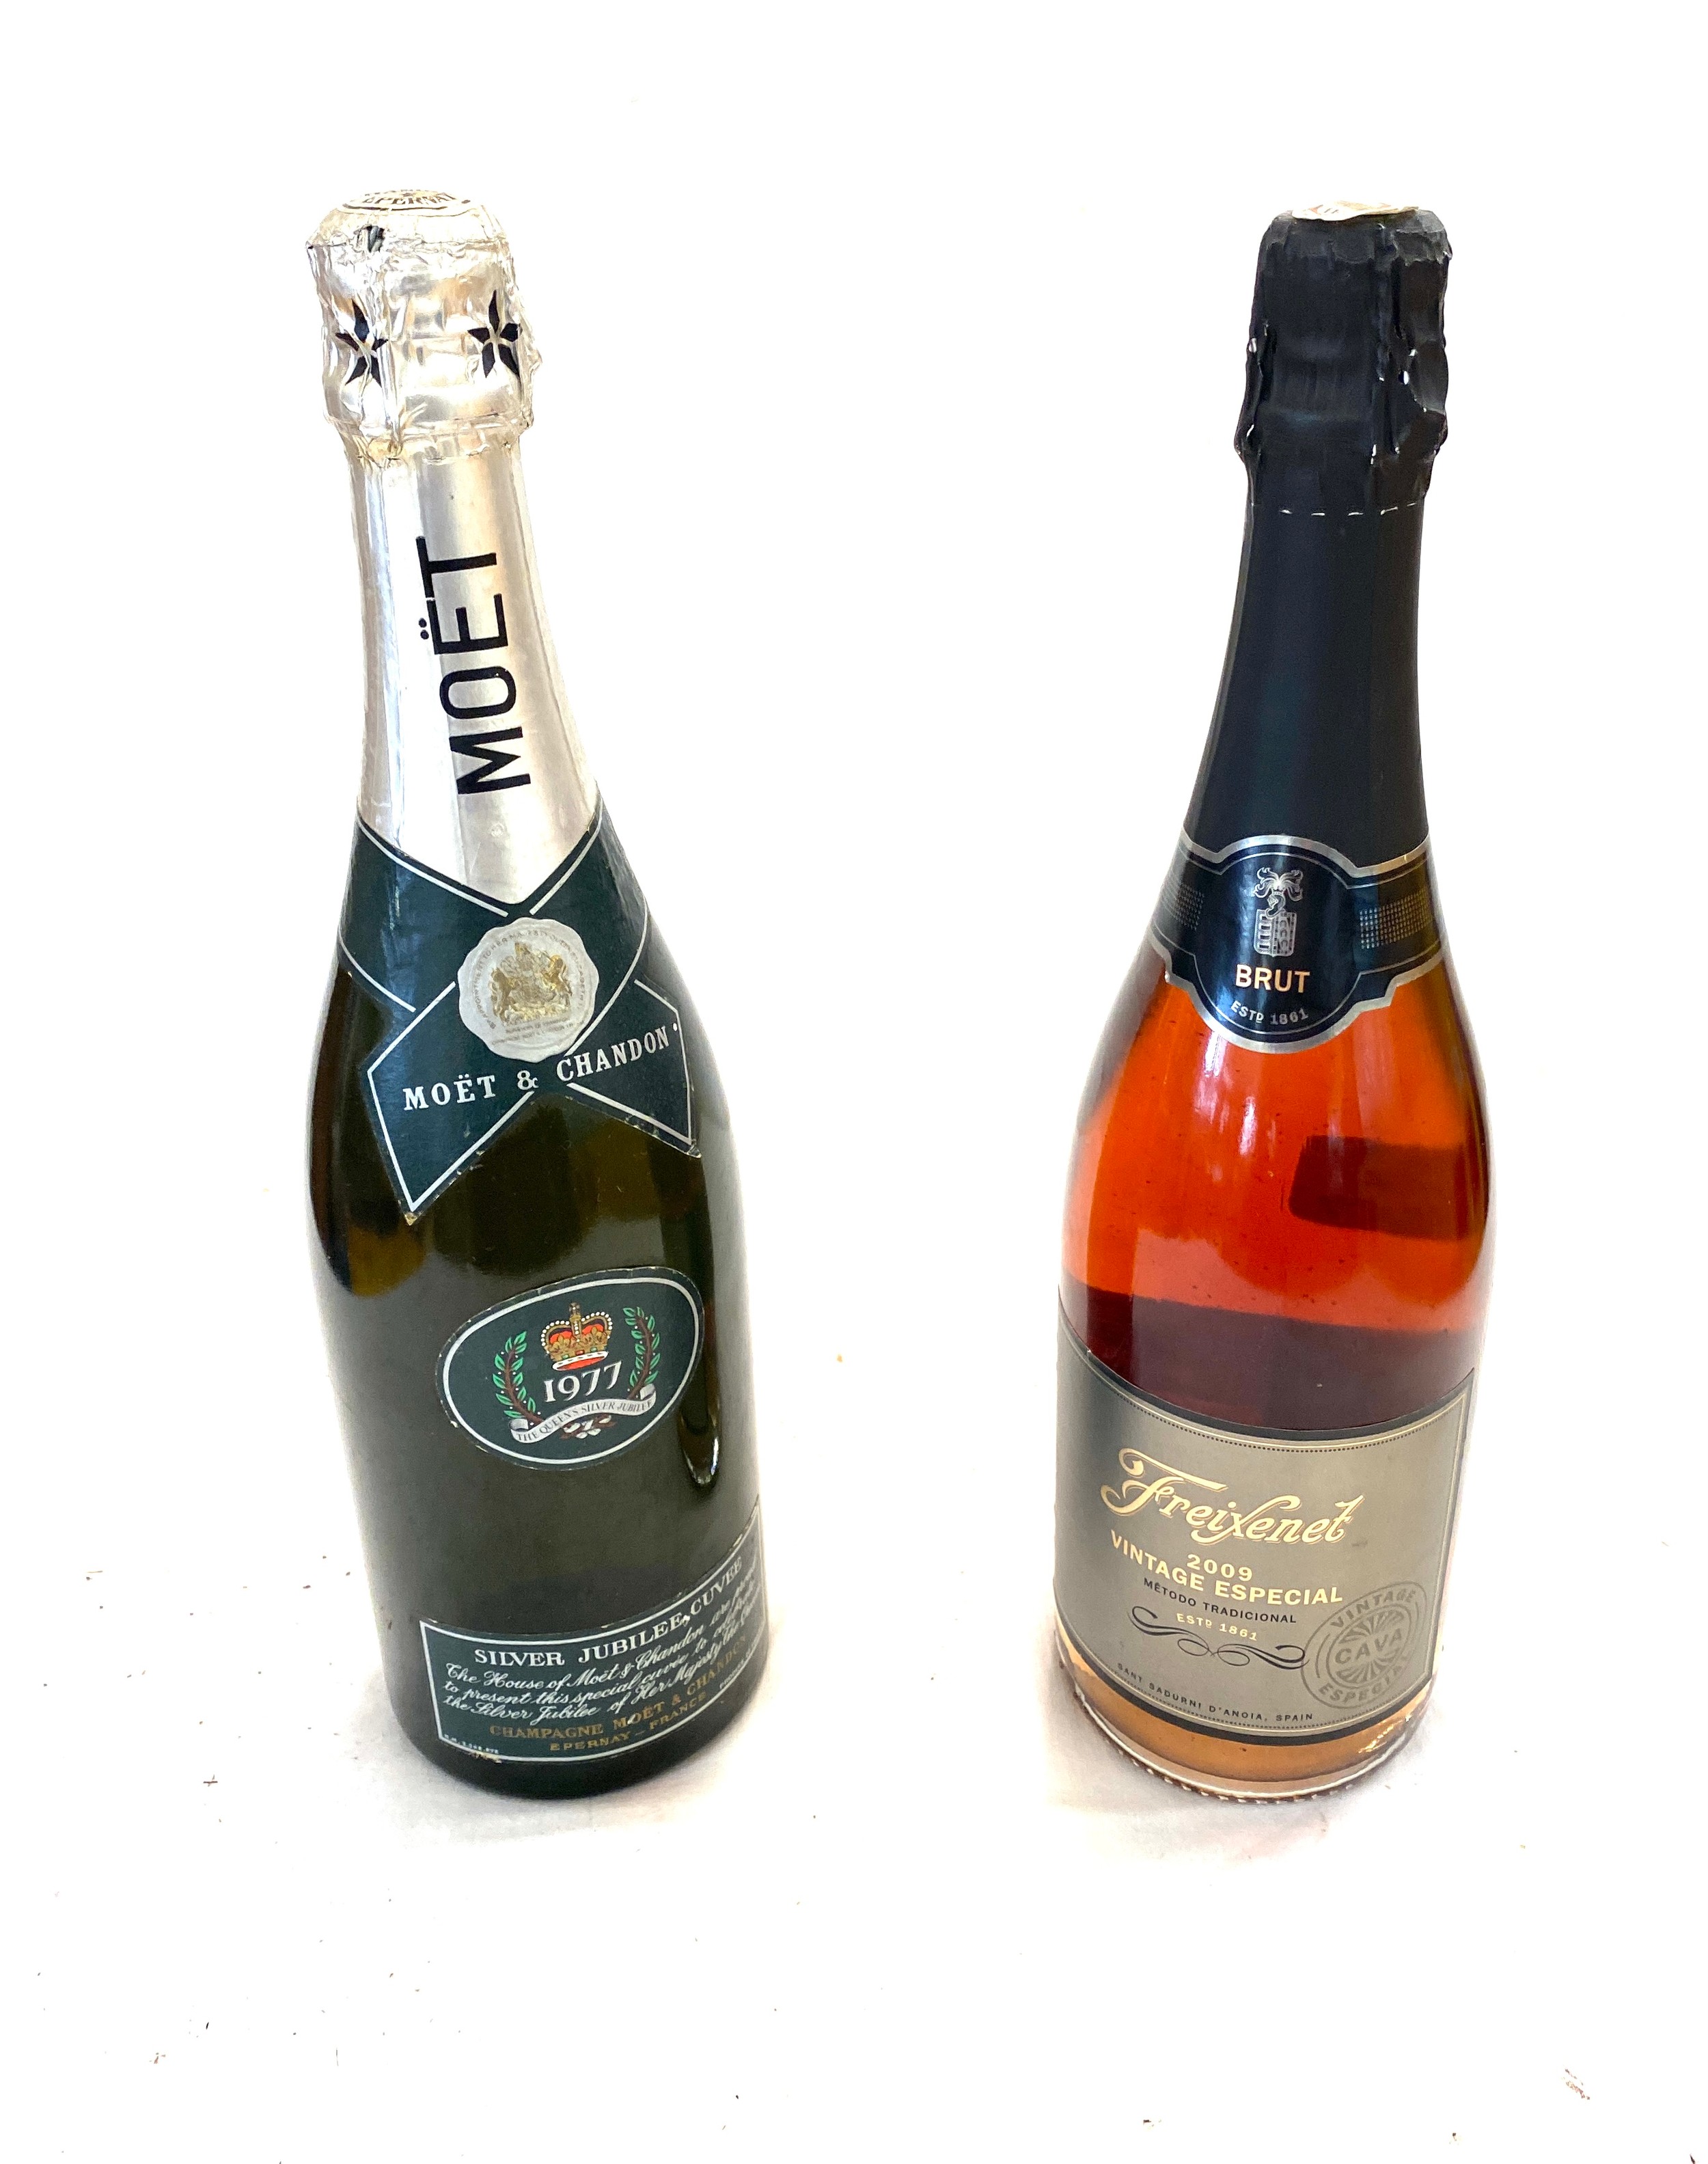 Bottle of sealed Moet and Chandon 1977, The queens silver jubille, Freixenet sealed bottle - Image 3 of 5